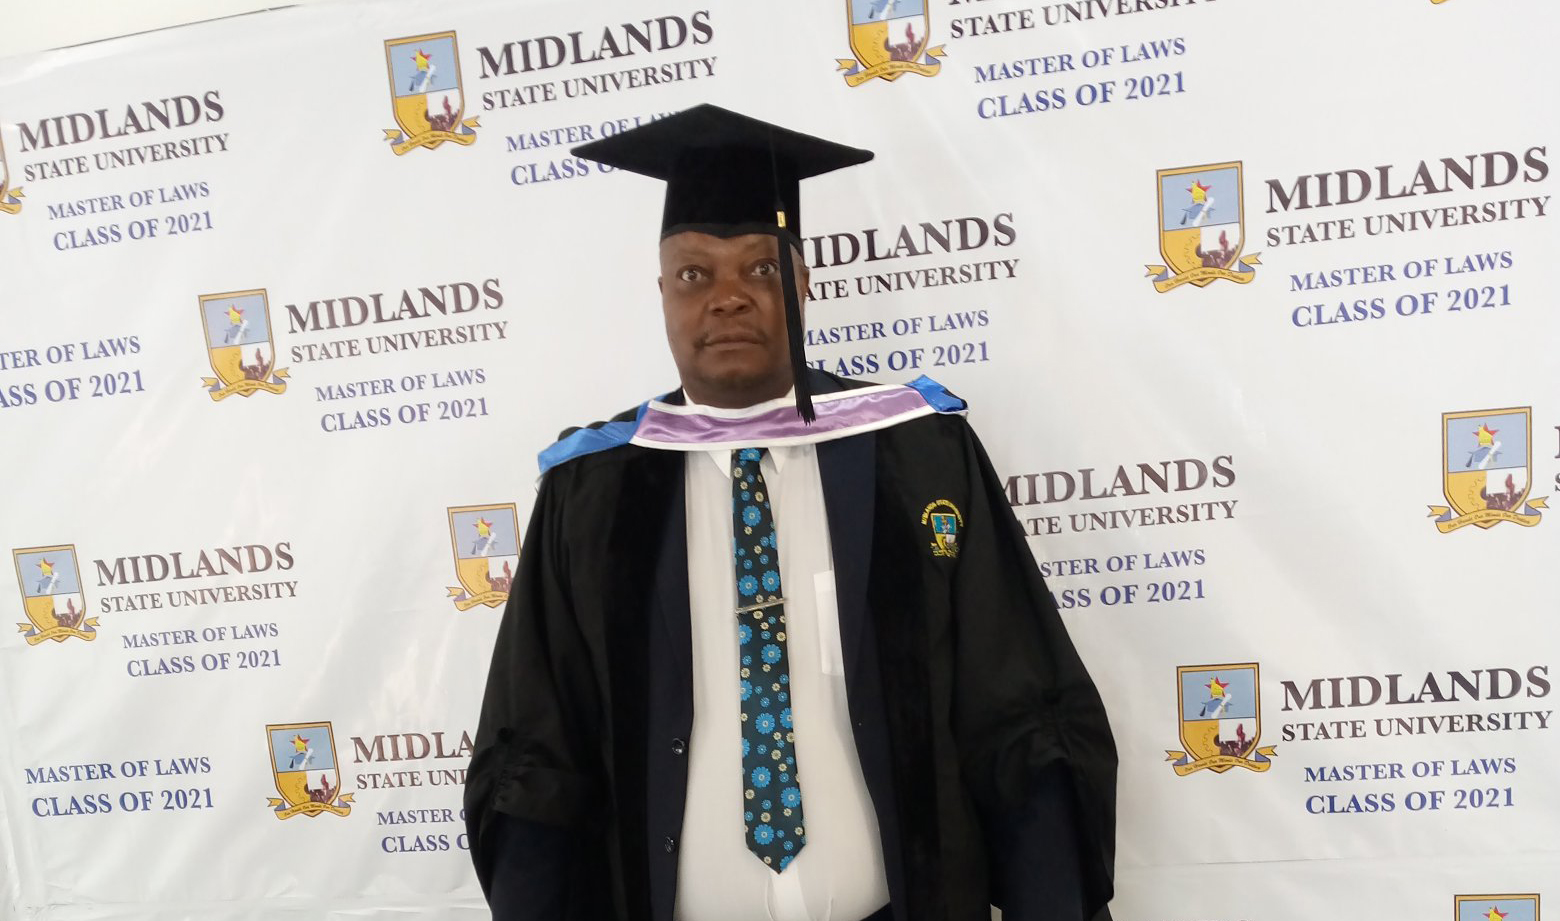 Firebrand opposition MDC Alliance vice chairman Job Sikhala has graduated with a Master of Laws (LLM) from the Midlands State University (MSU) and his thesis was unsurprisingly 'politically agitative'.